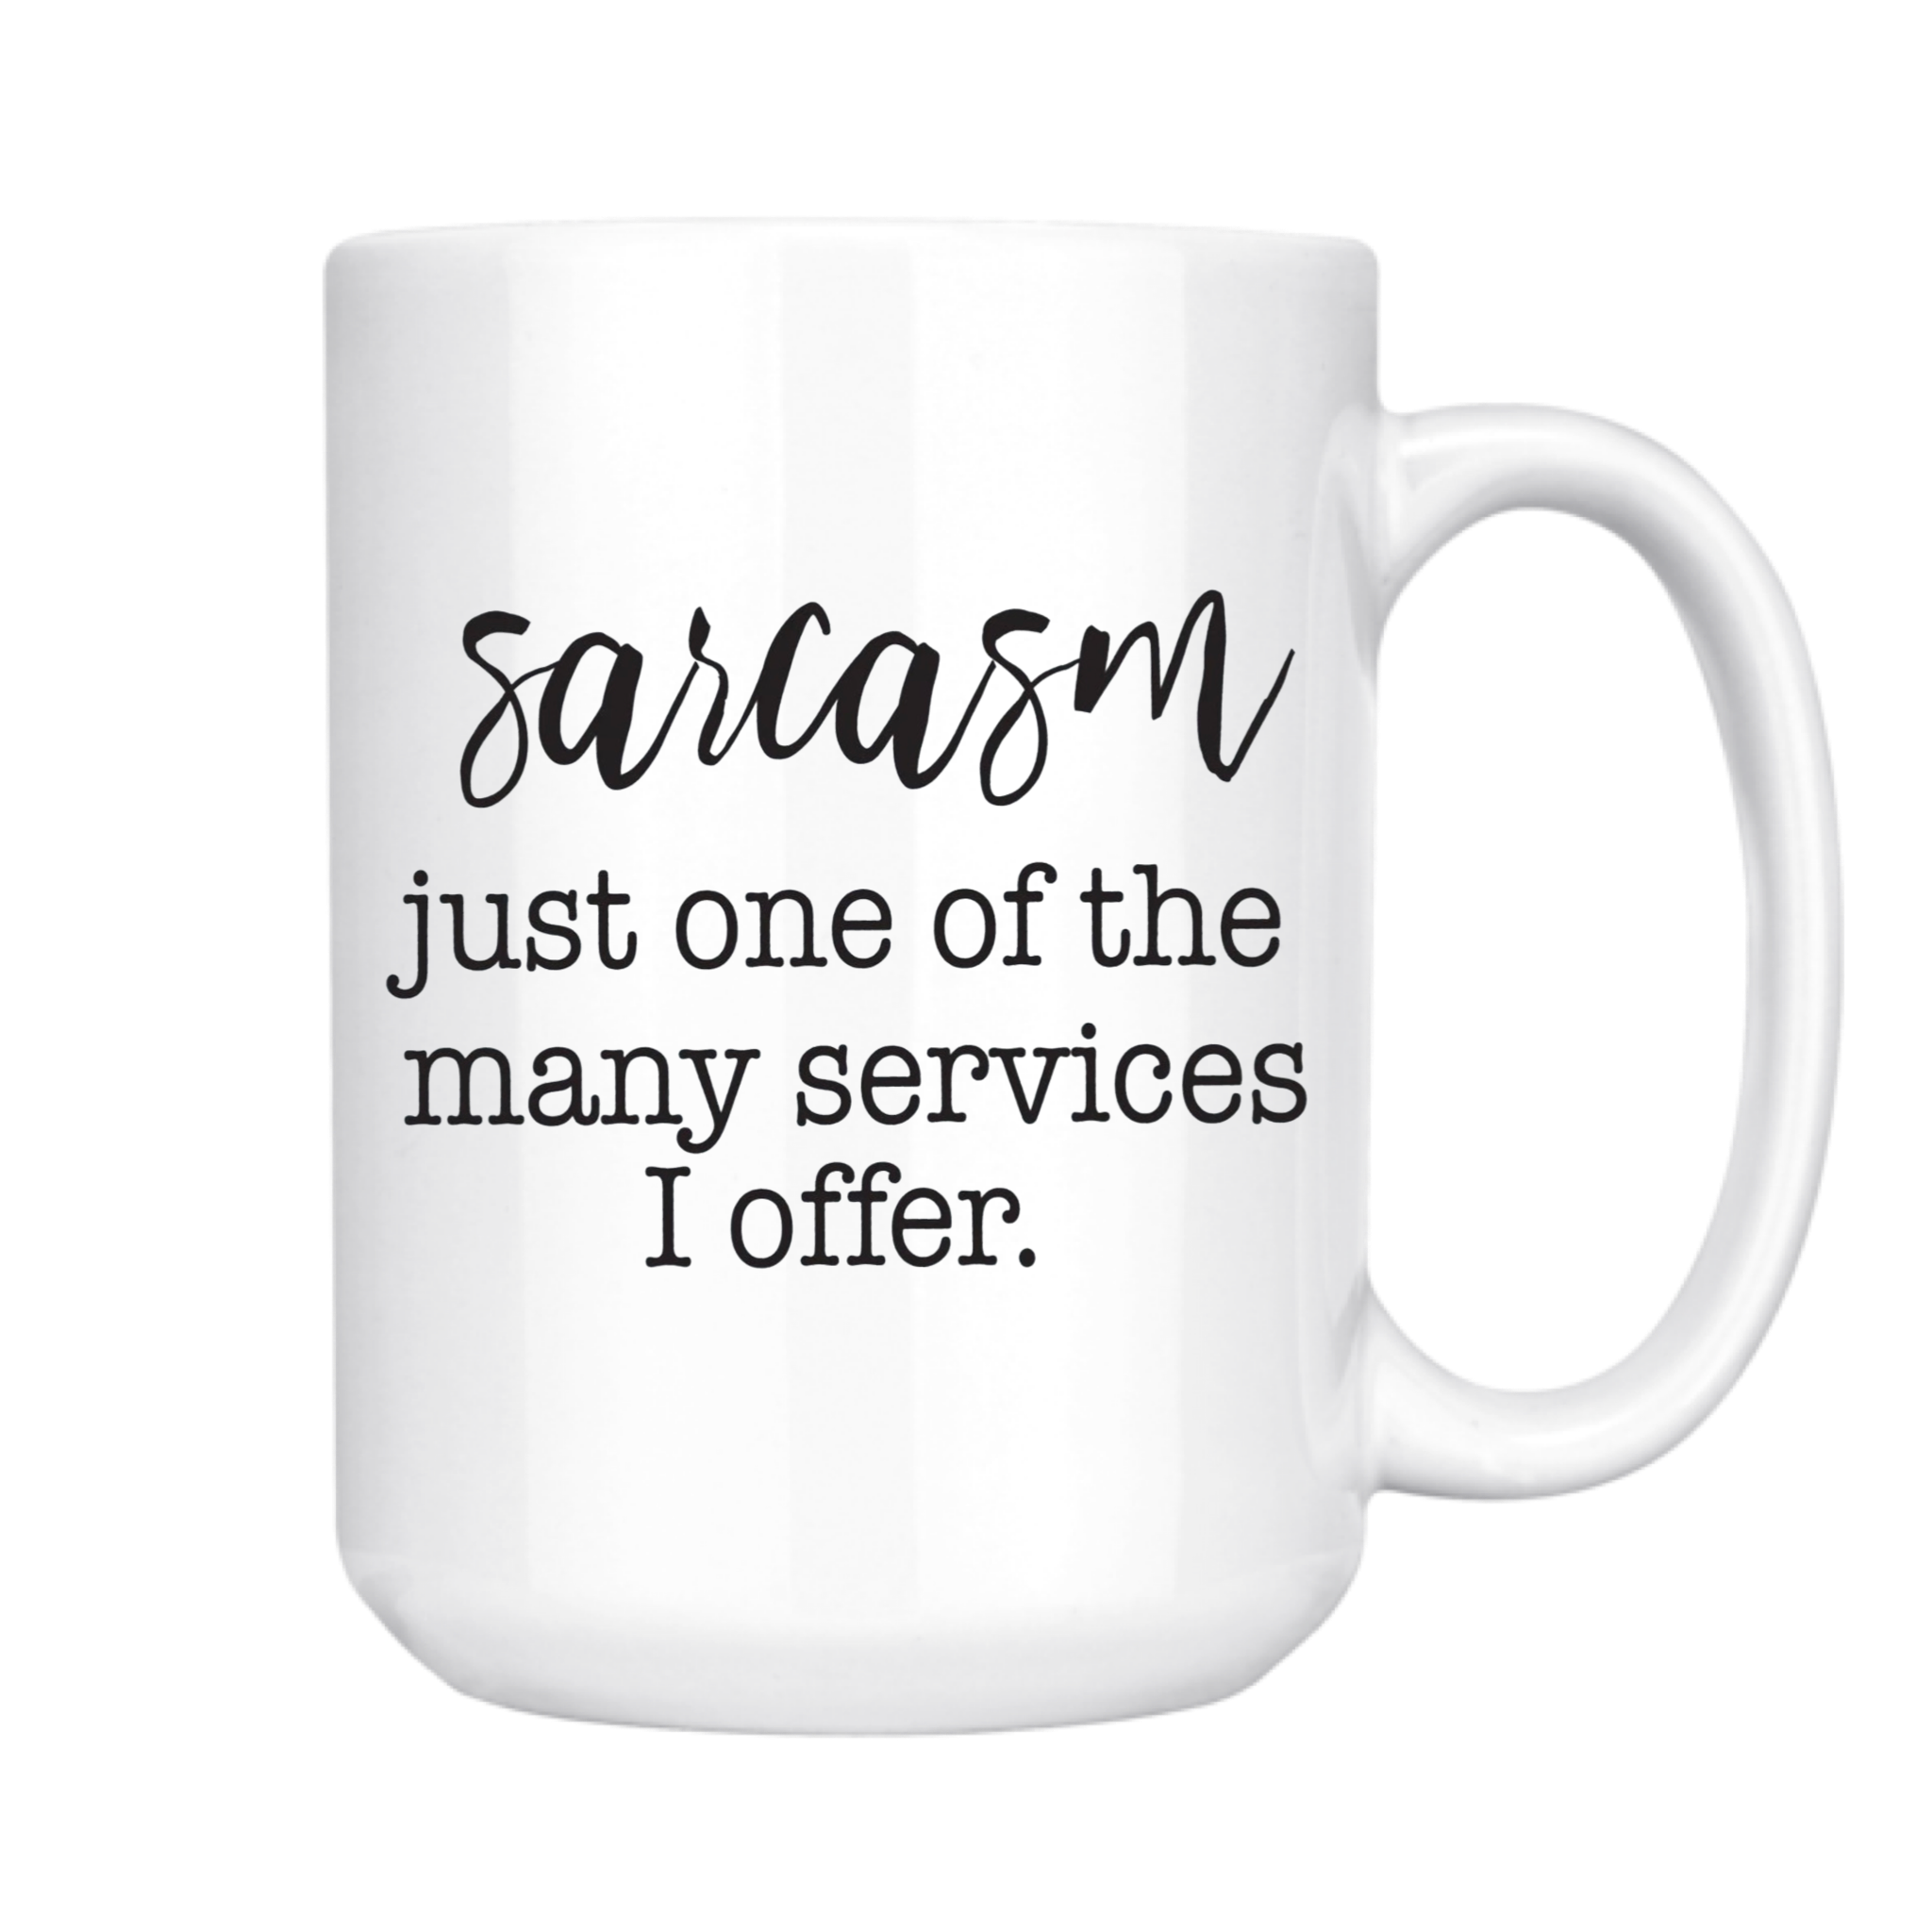 SARCASM - JUST ONE OF THE MANY SERVICES I OFFER MUG